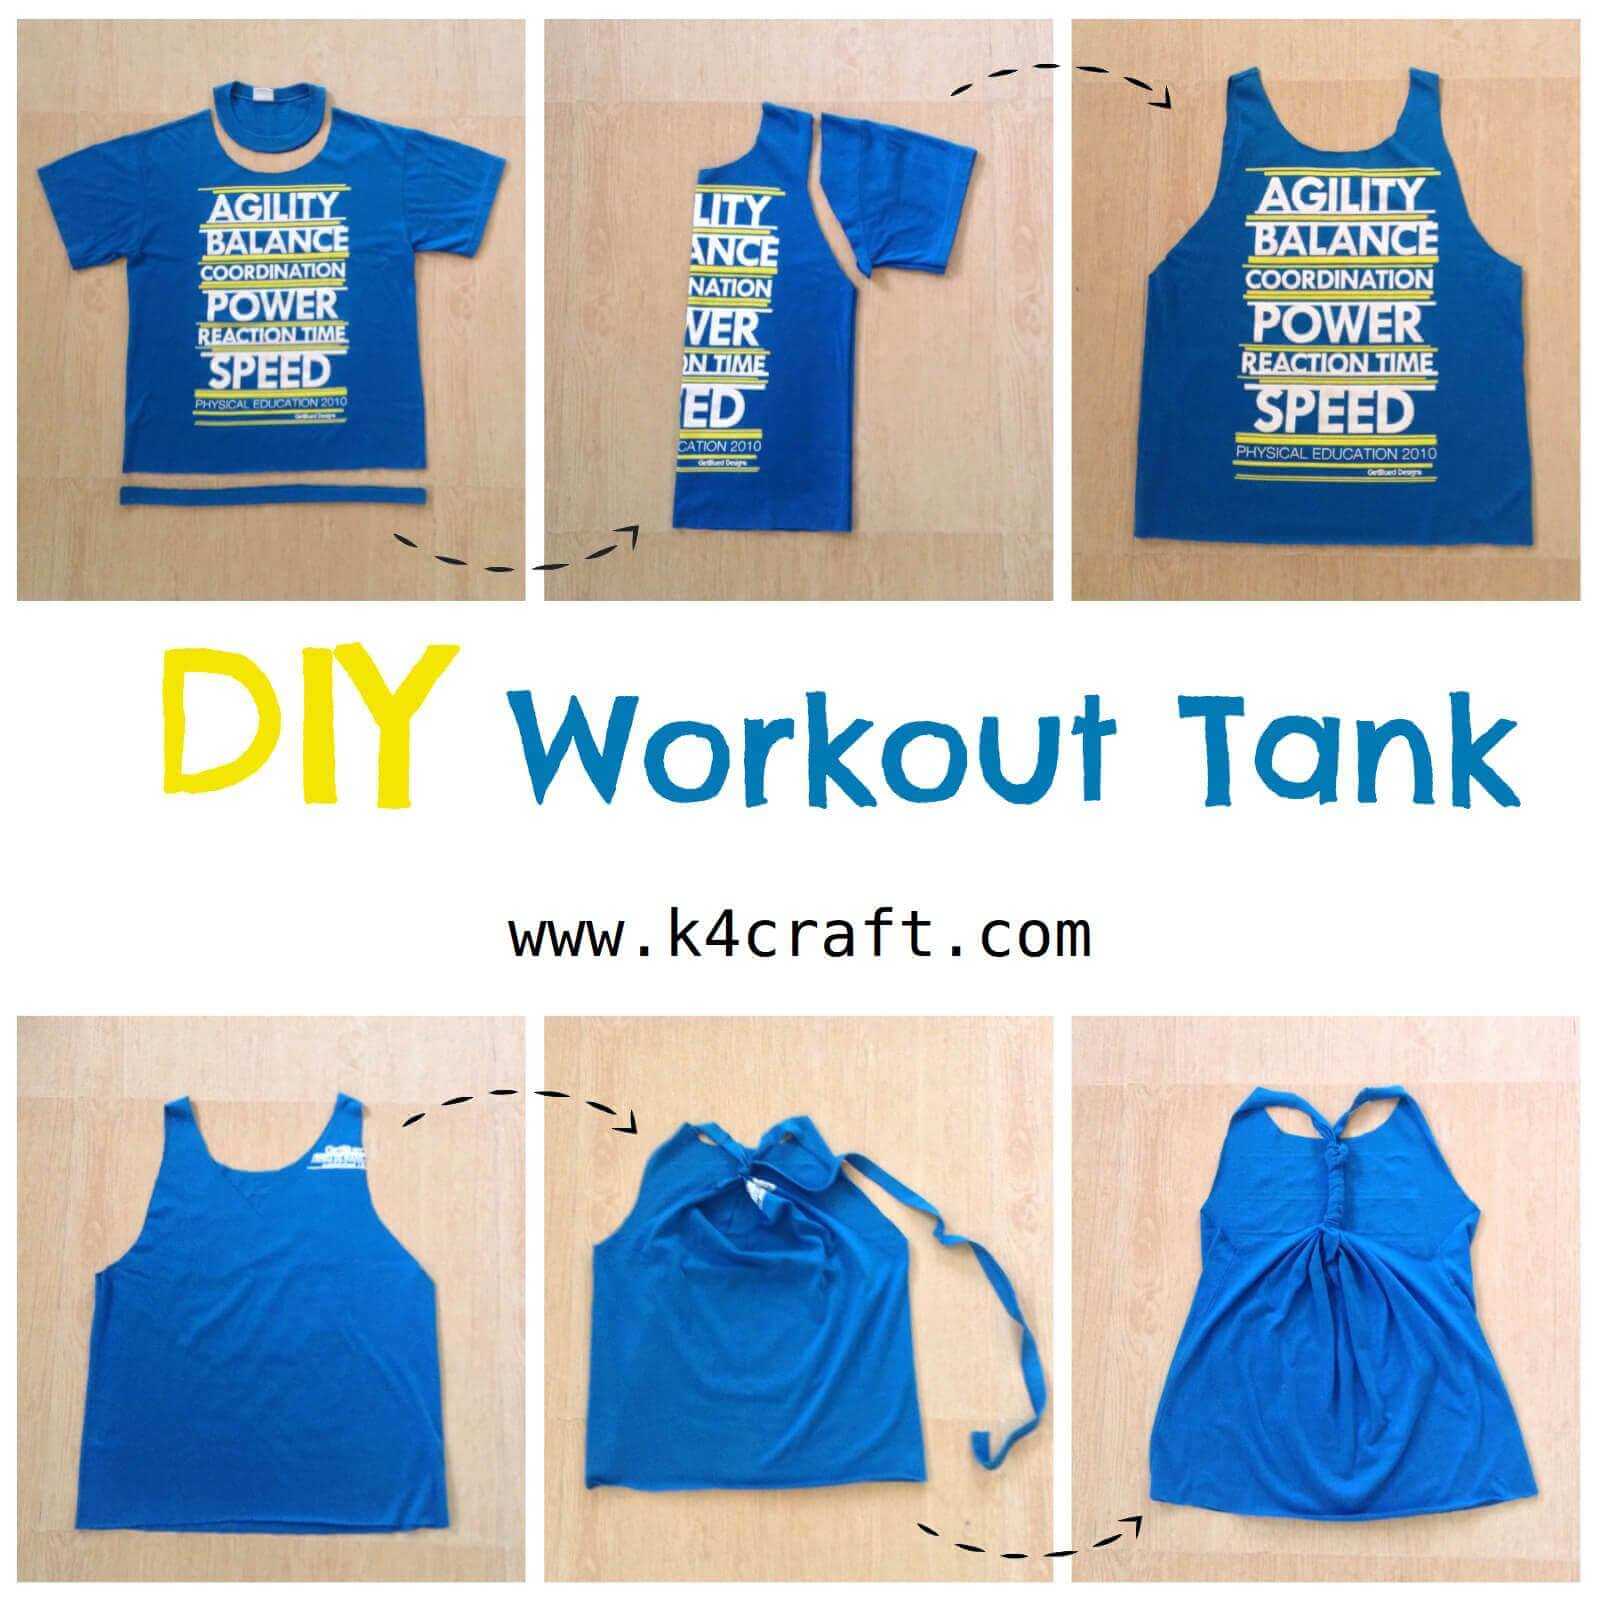 DIY Recycled Clothing Hacks, Designs And Tutorial - K4 Craft